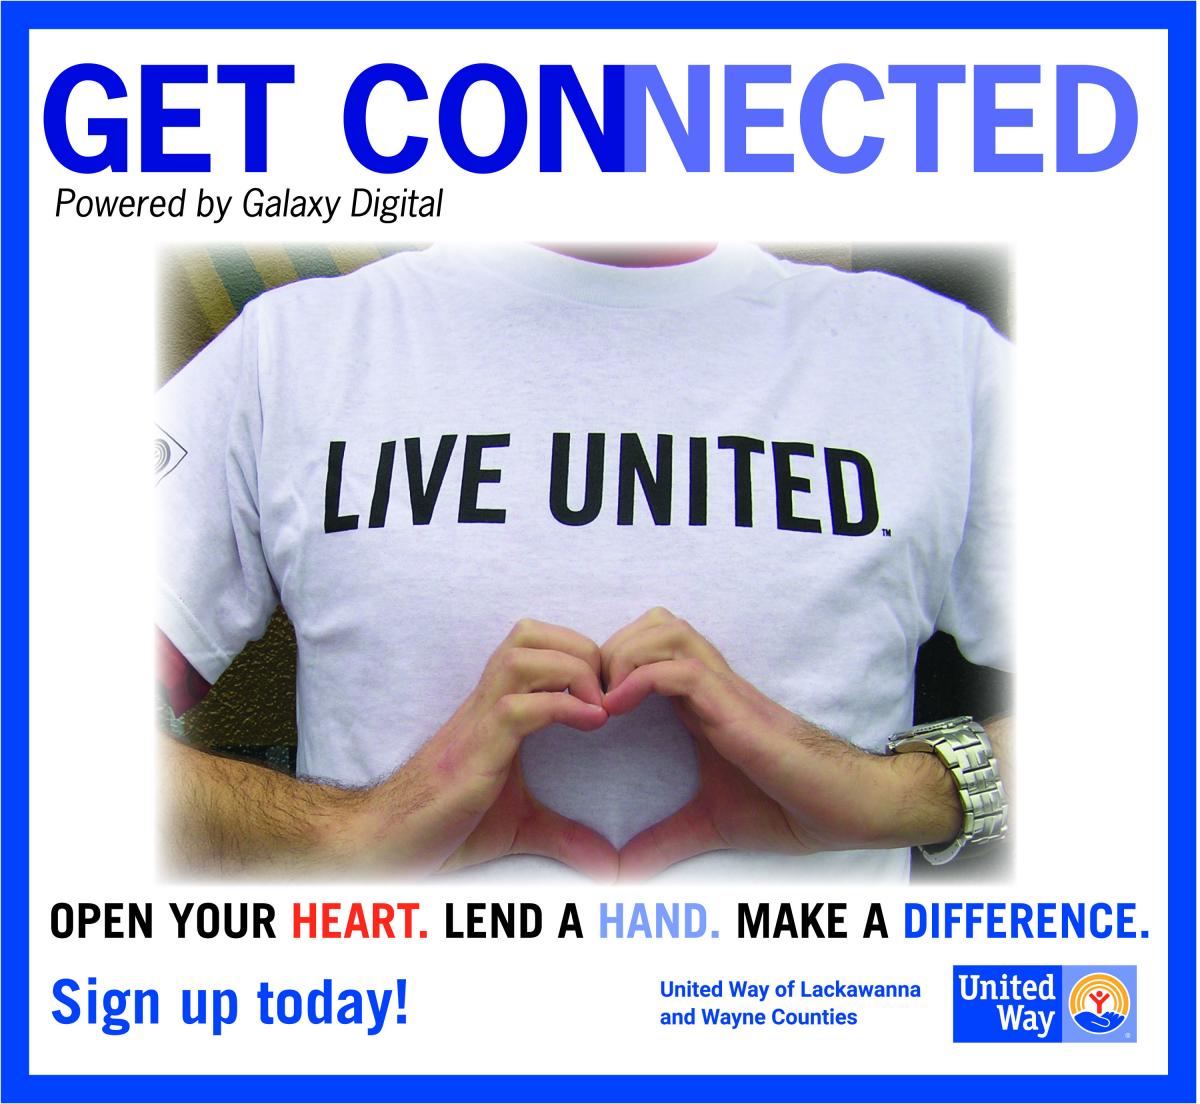 Get Connected with ways to make a difference!